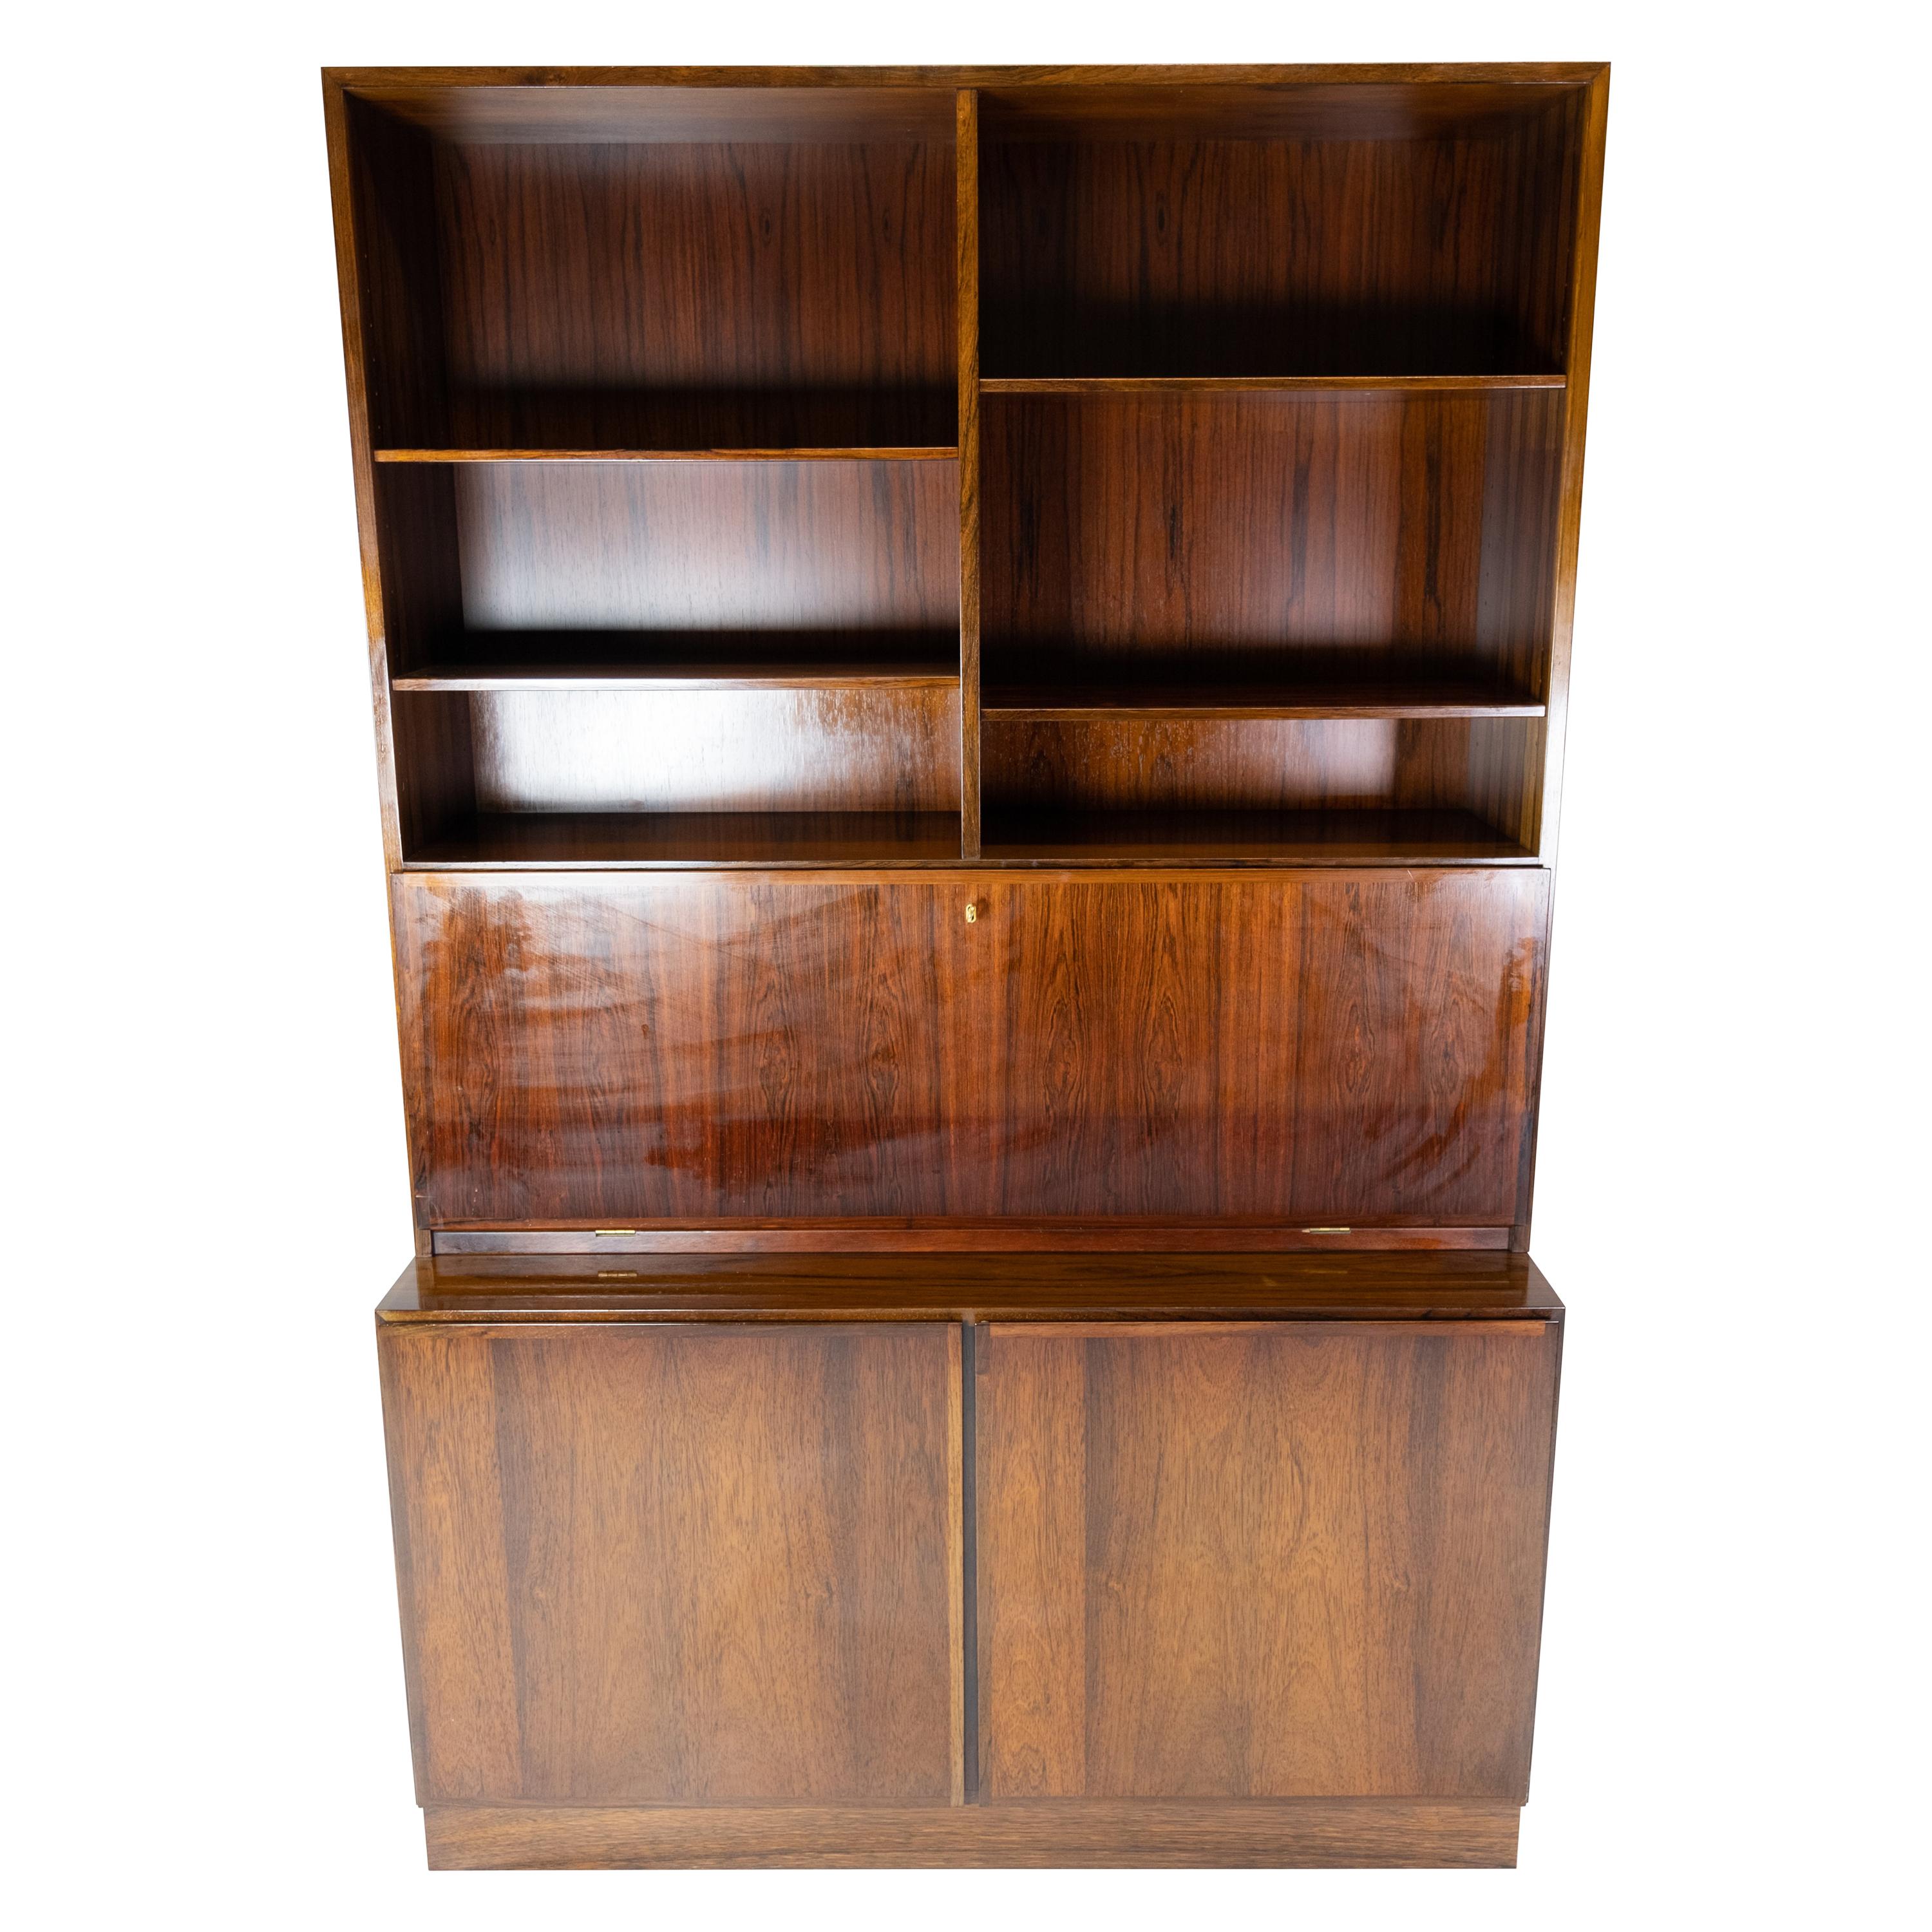 Bookcase with Cabinets in Rosewood, Model No. 9, Designed by Omann Junior